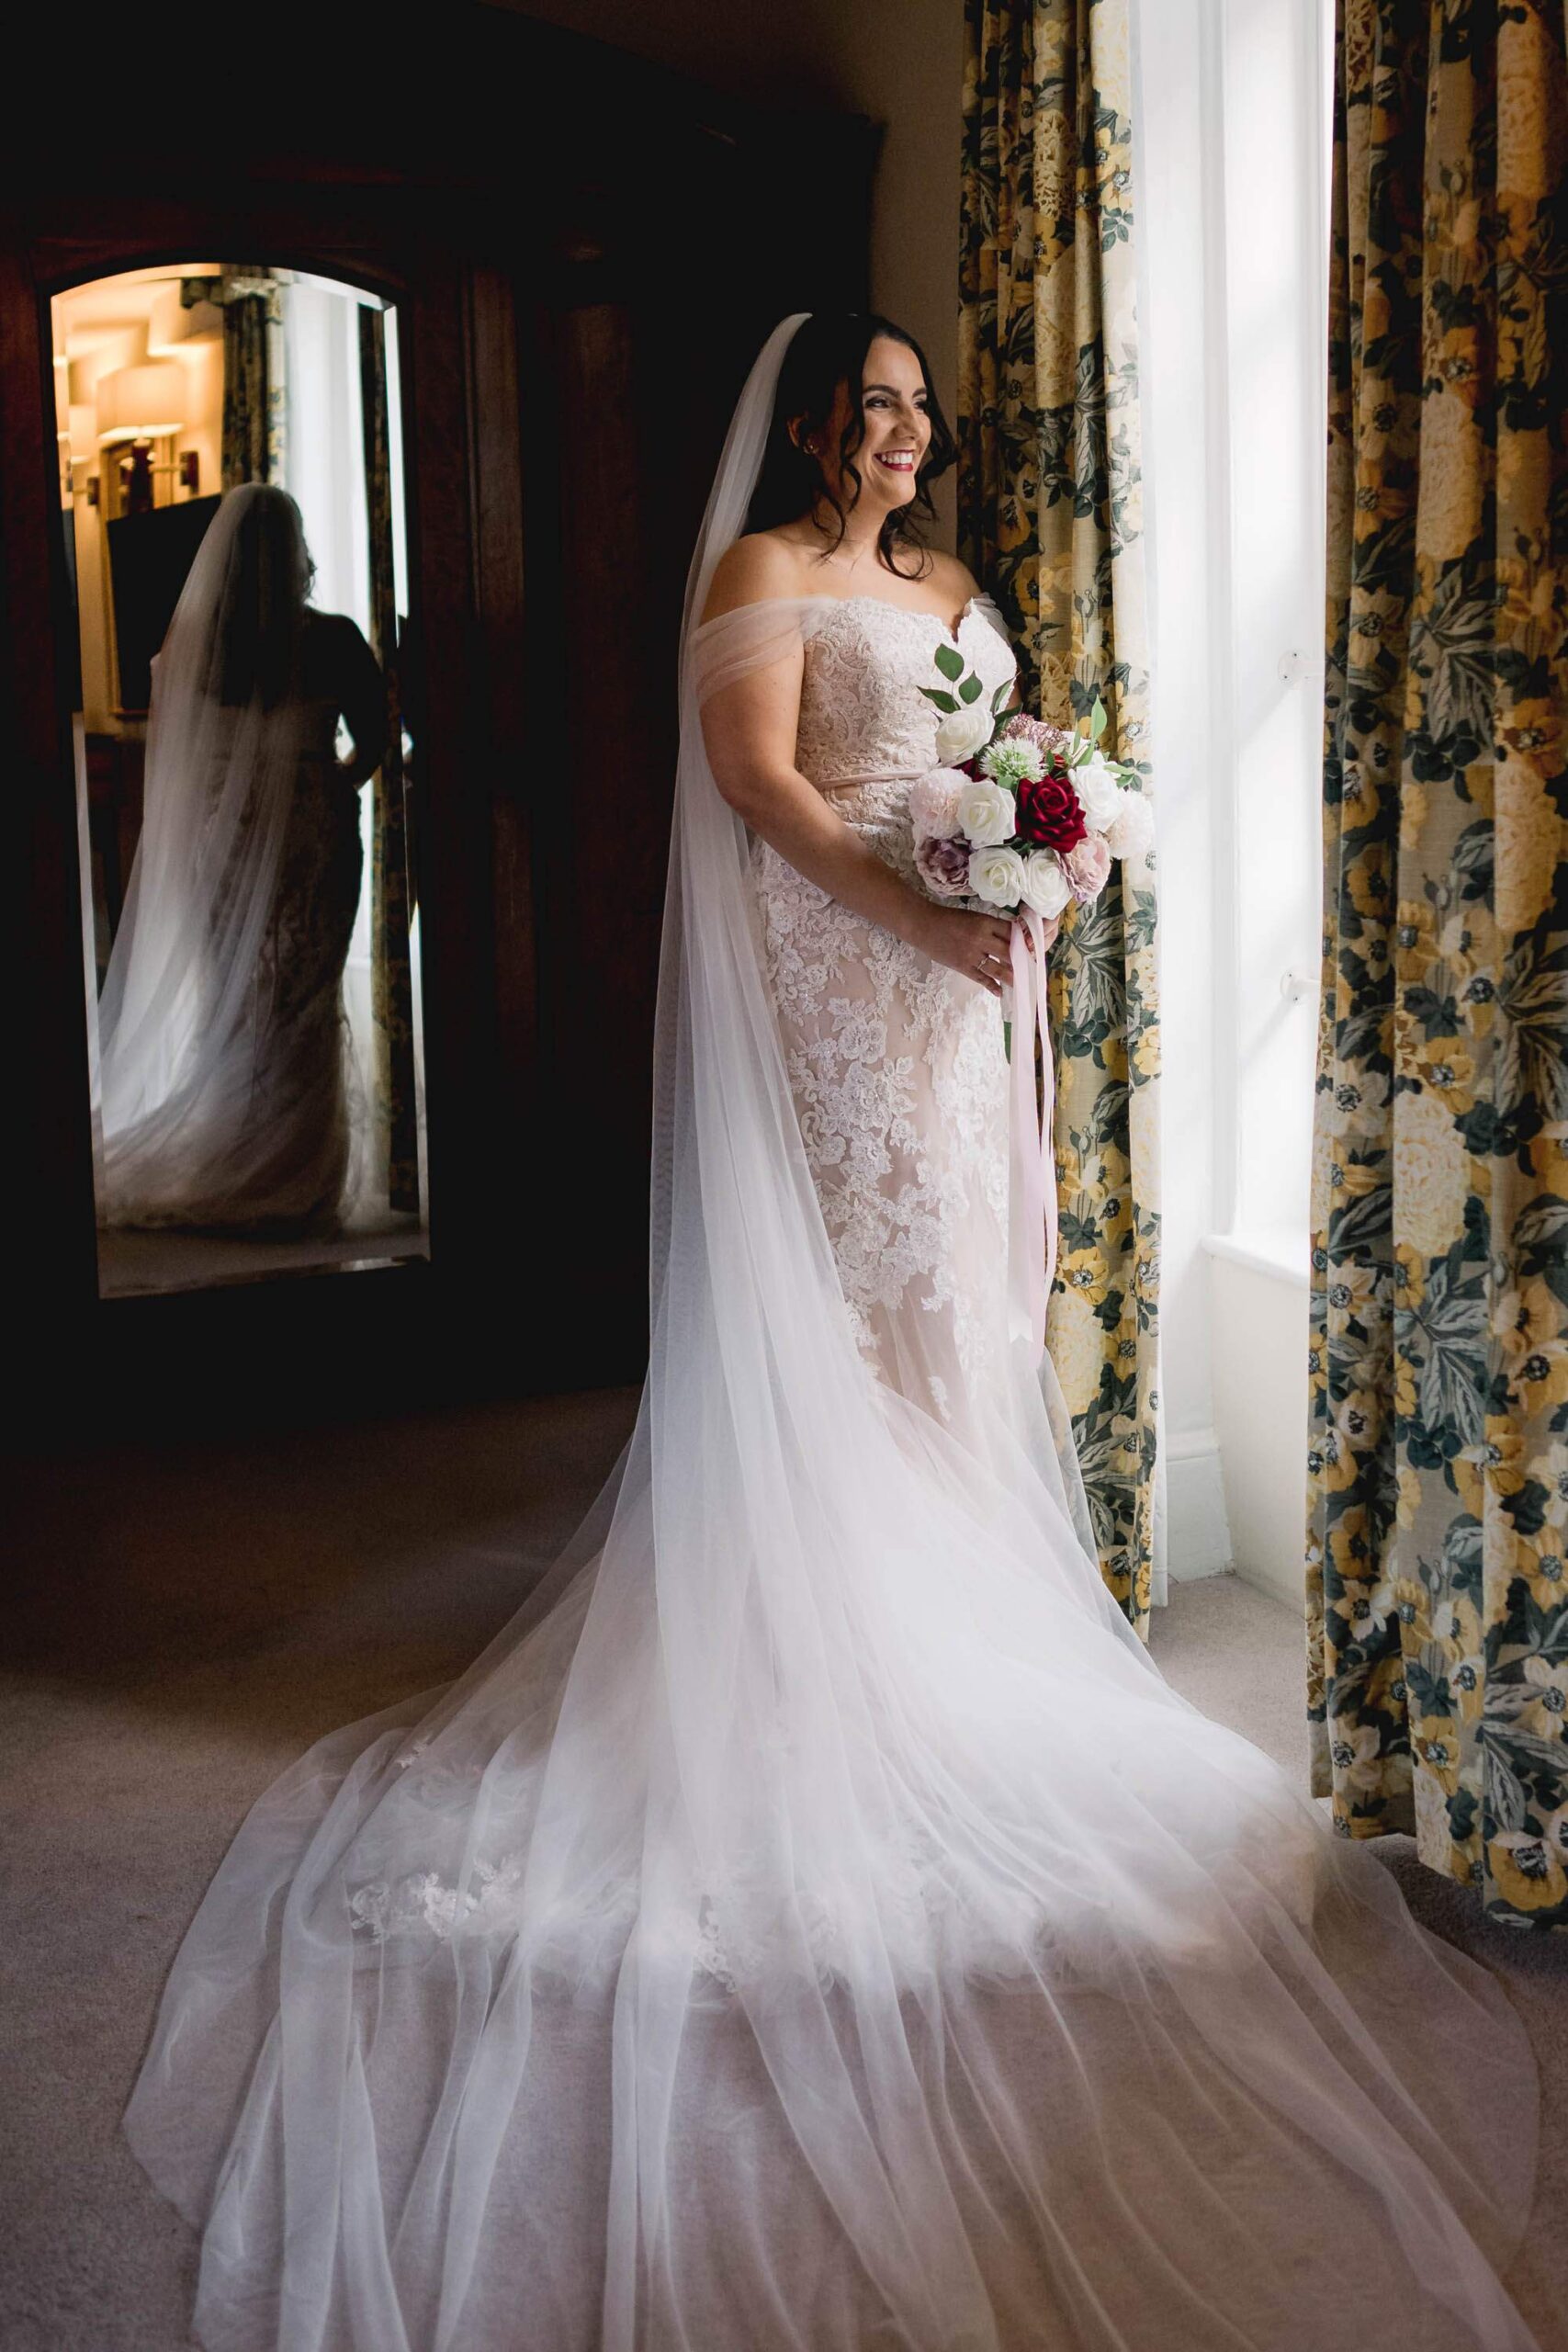 Bride looking out the window at Norfolk Arms hotel in Arundel on her wedding day.